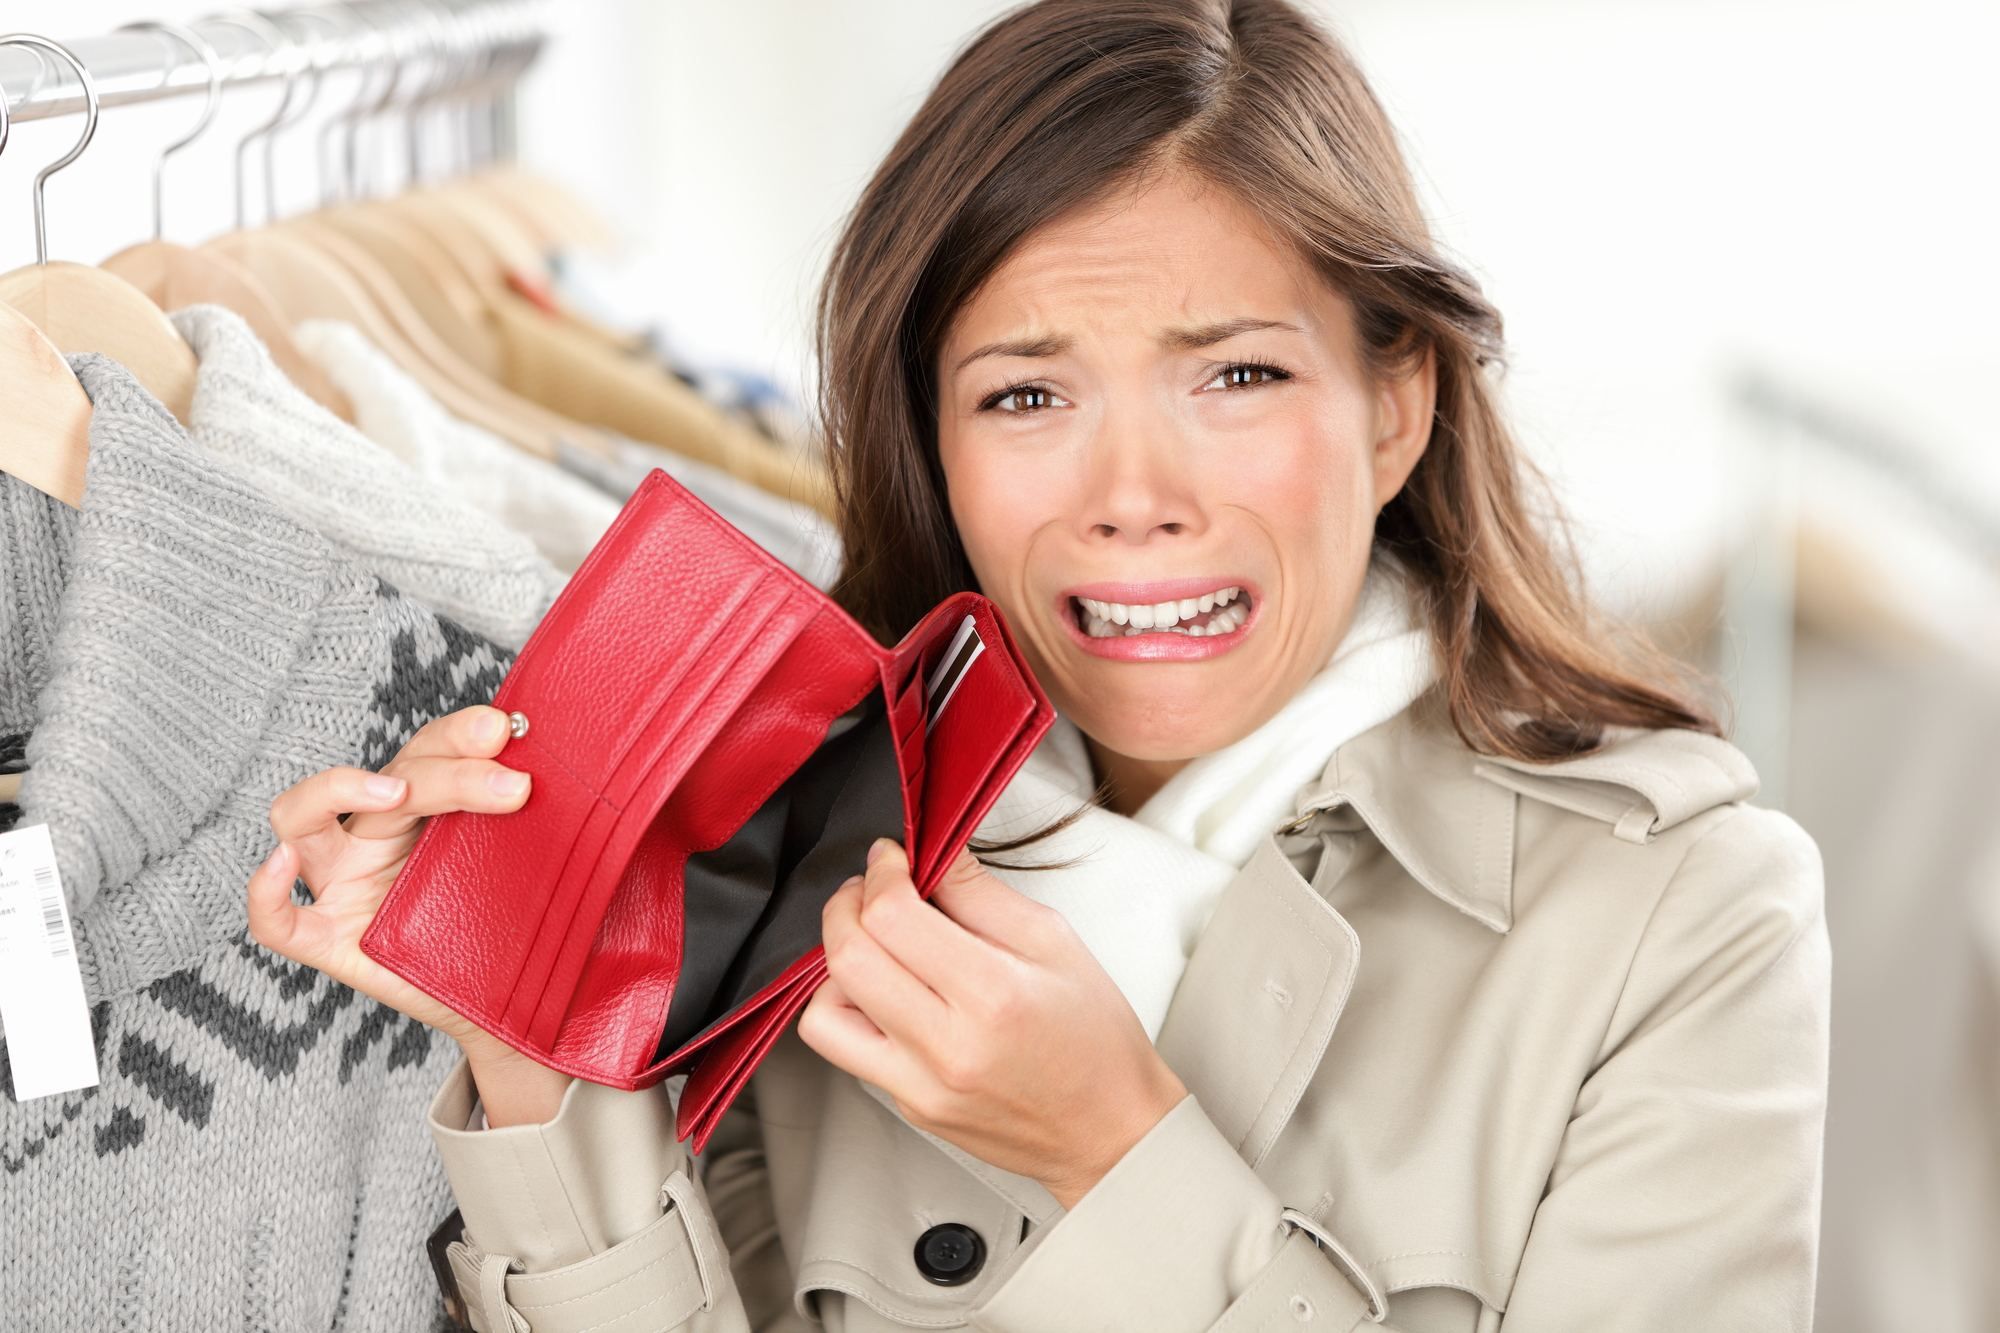 Upset female shopper shows wallet with no money